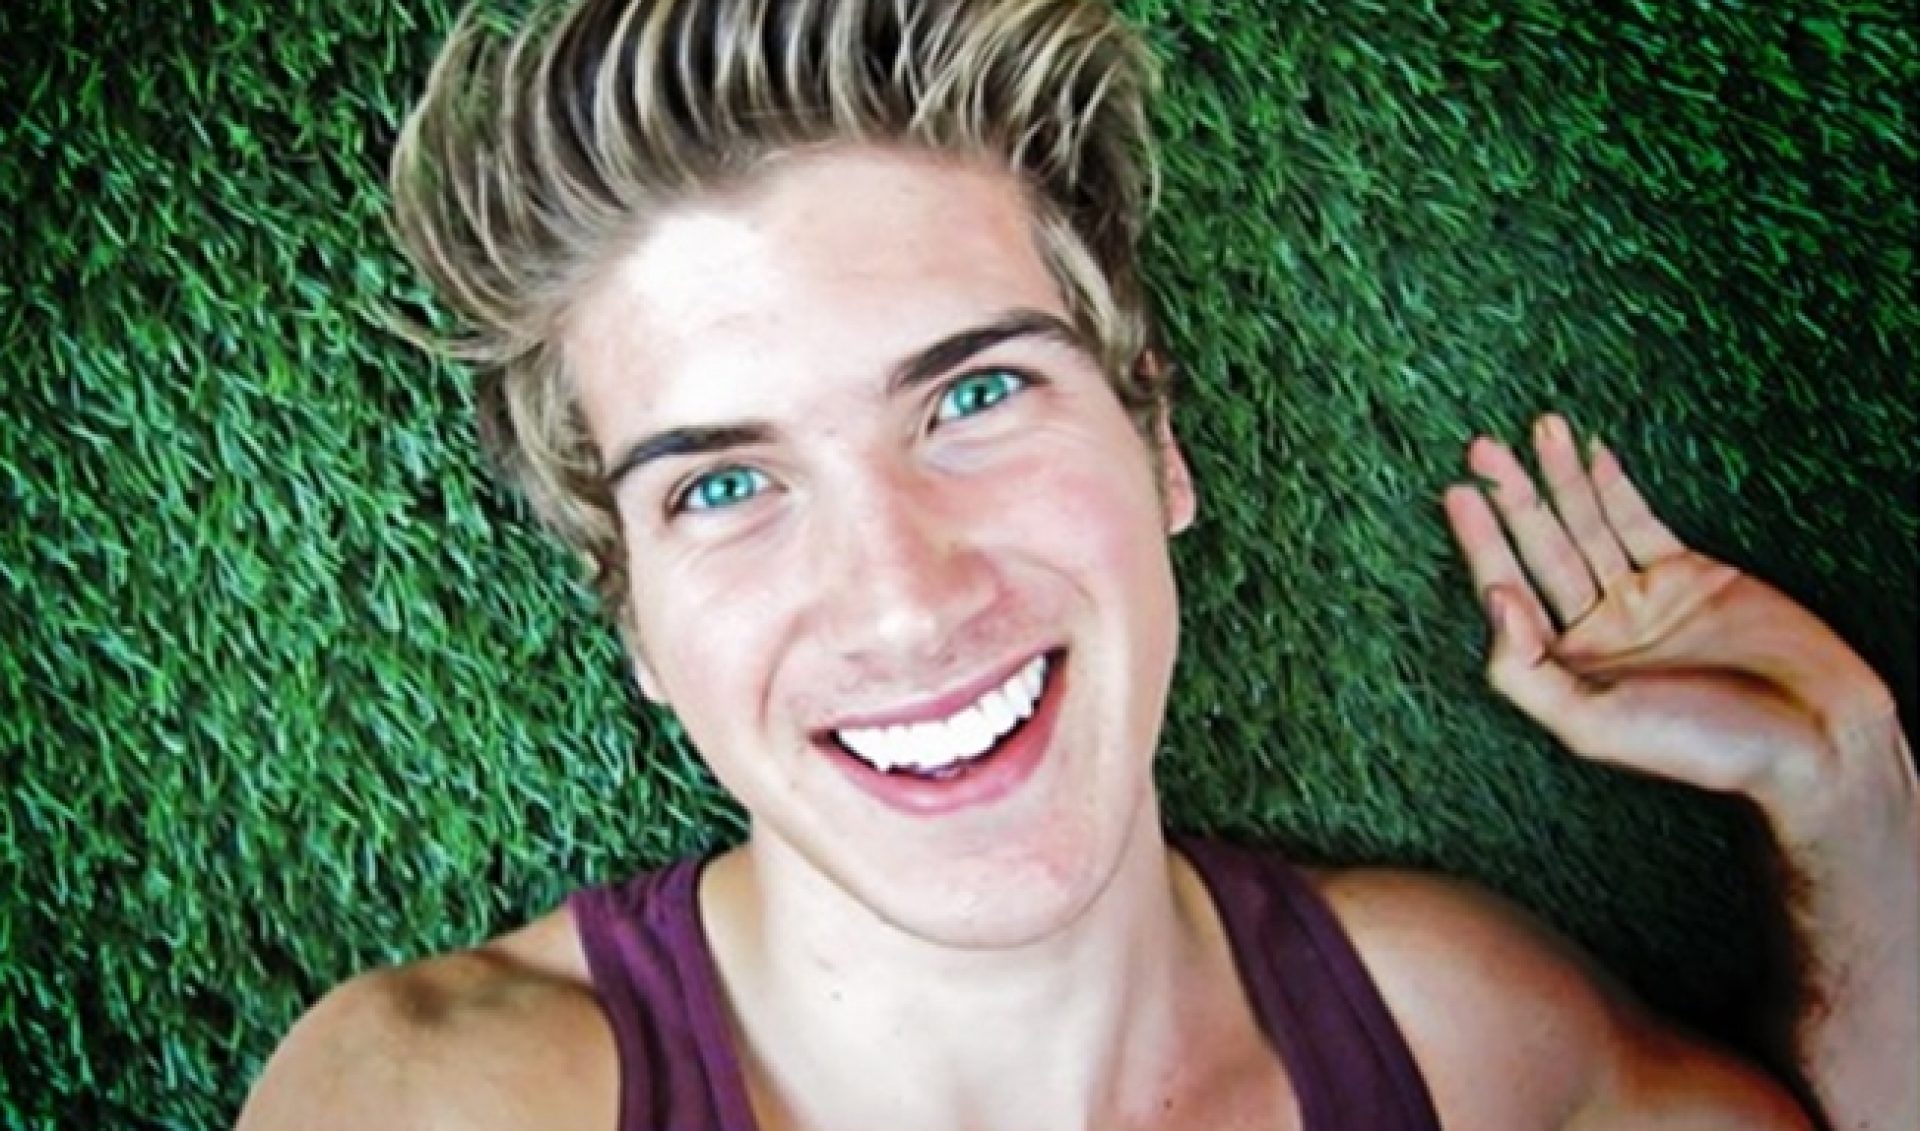 2. How to Get Joey Graceffa's Blue Hair - wide 7